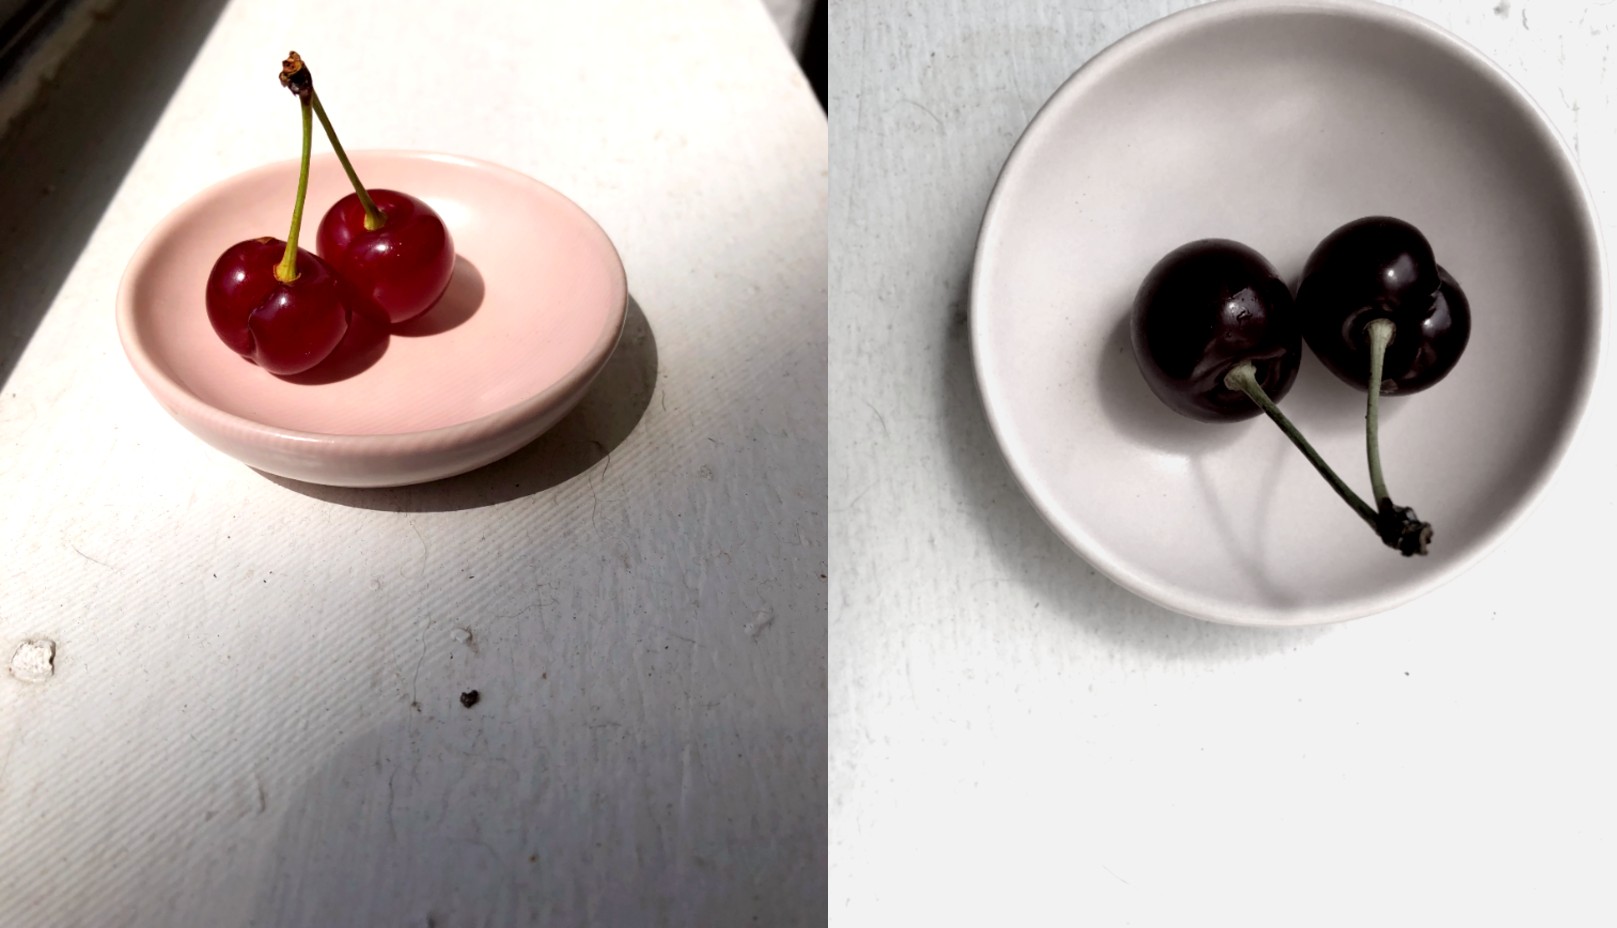 two images of cherries on a small plate: one in color and one desaturated